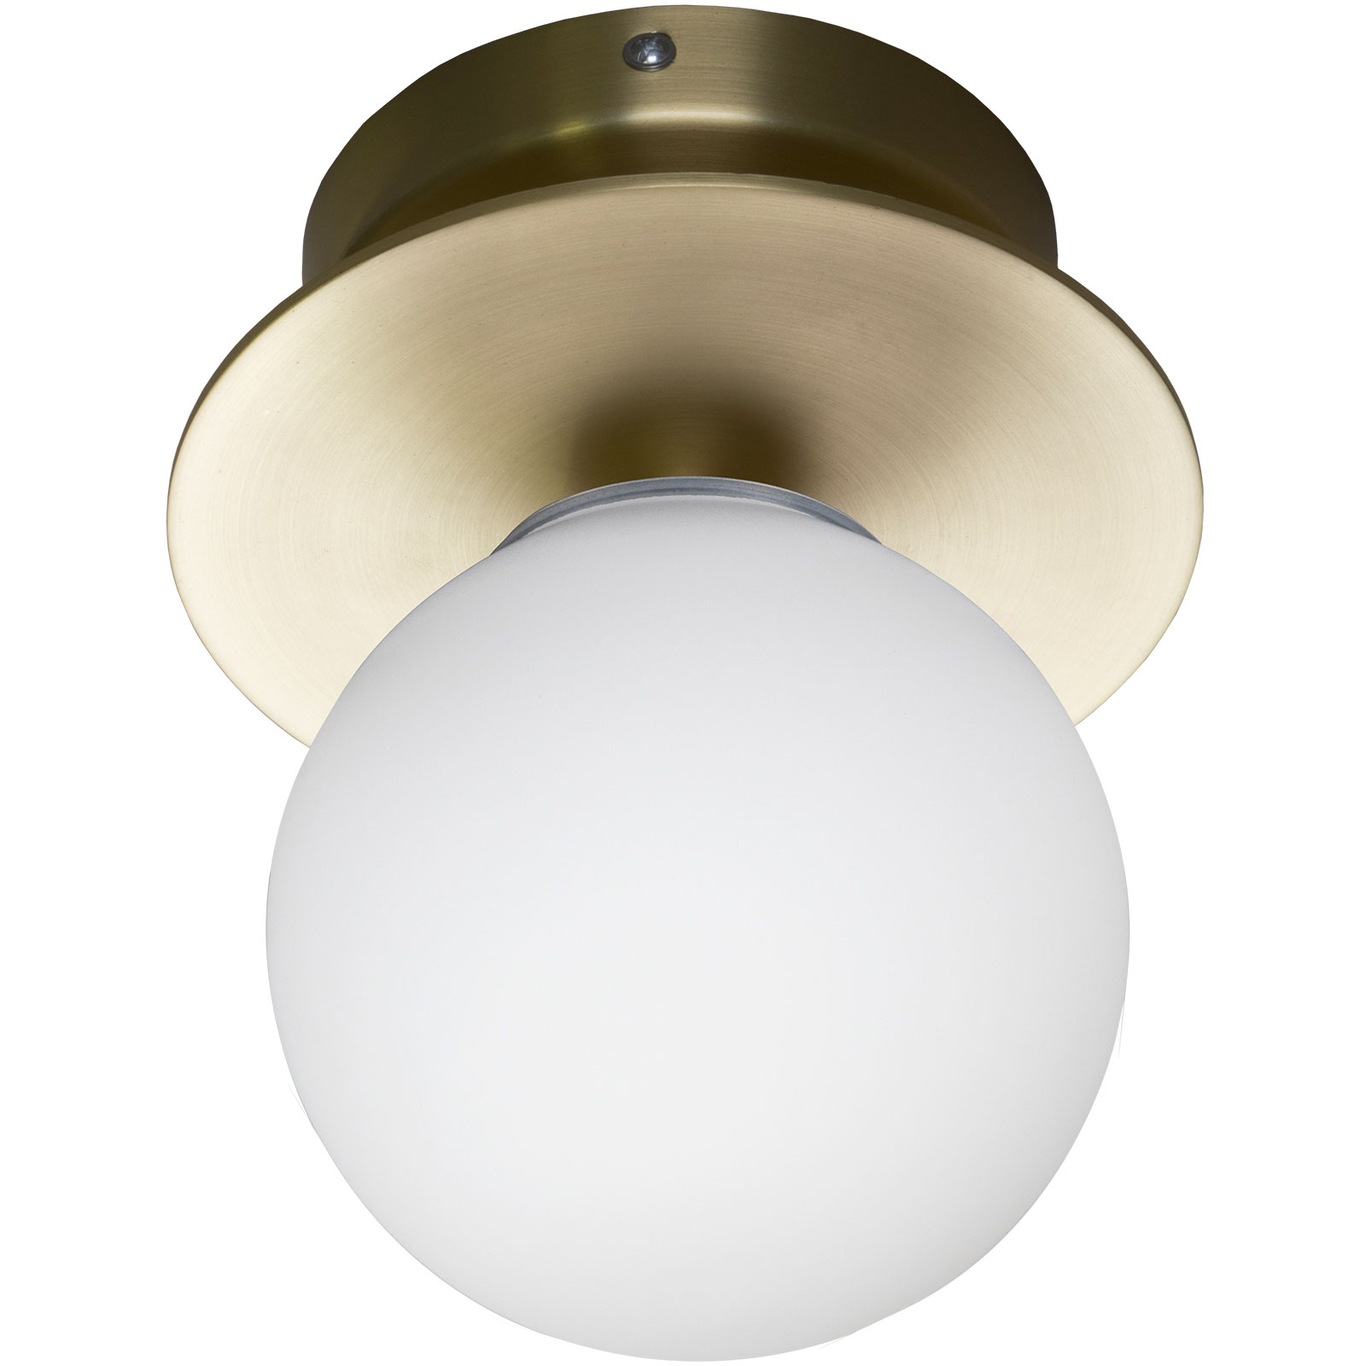 Art Deco 24 Wall/Ceiling Lamp, Brushed Brass